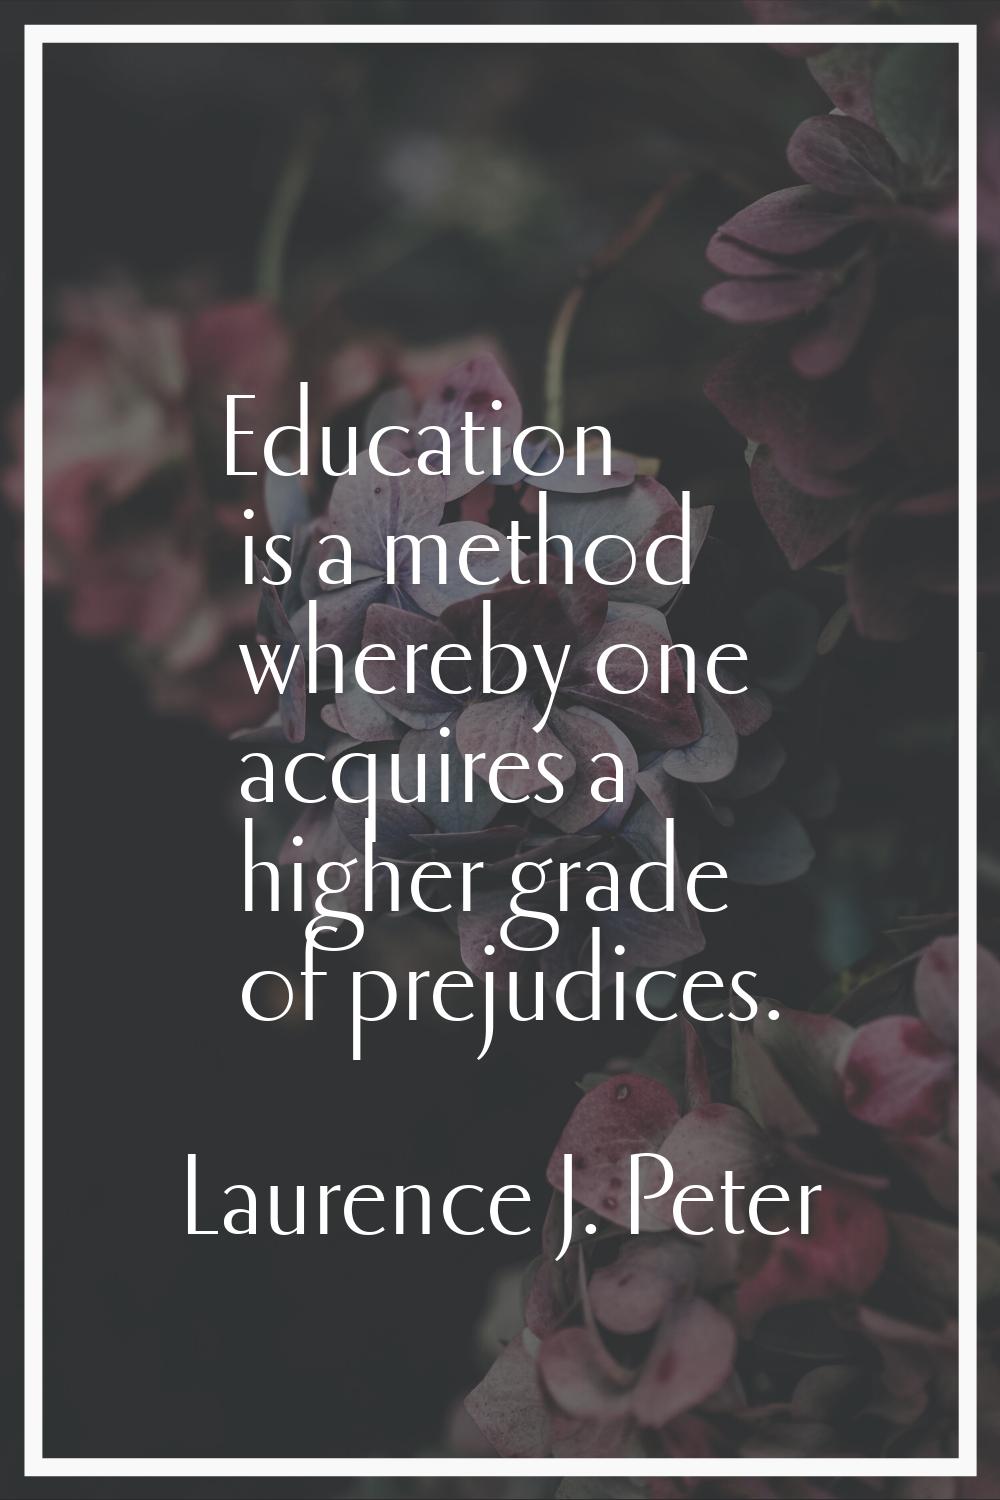 Education is a method whereby one acquires a higher grade of prejudices.